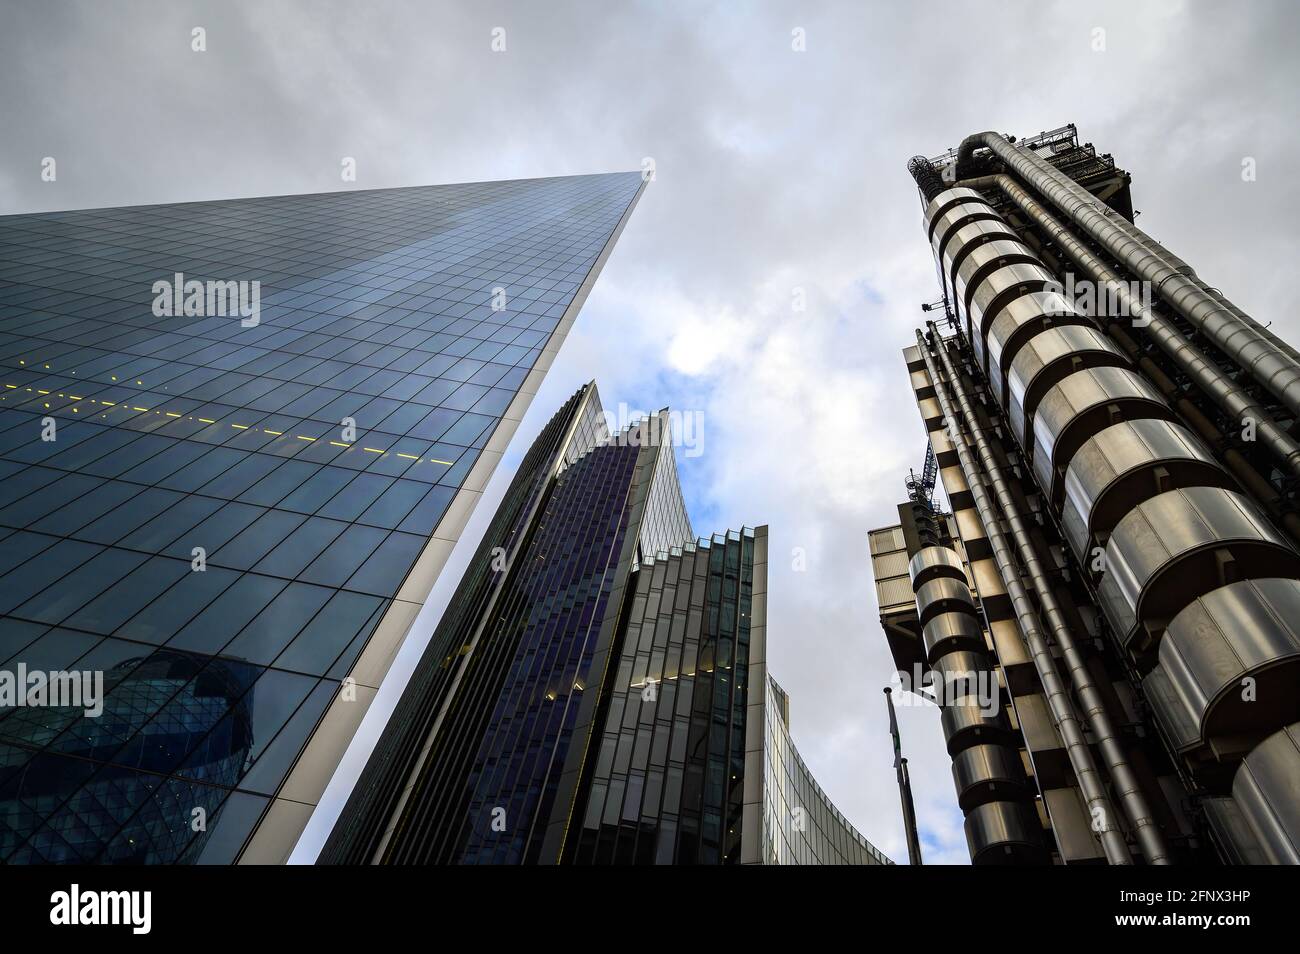 London, UK:Tall buildings in the City of London. L-R The Scalpel or 52 Lime Street, Willis Towers Watson offices and the Lloyd's of London Building. Stock Photo